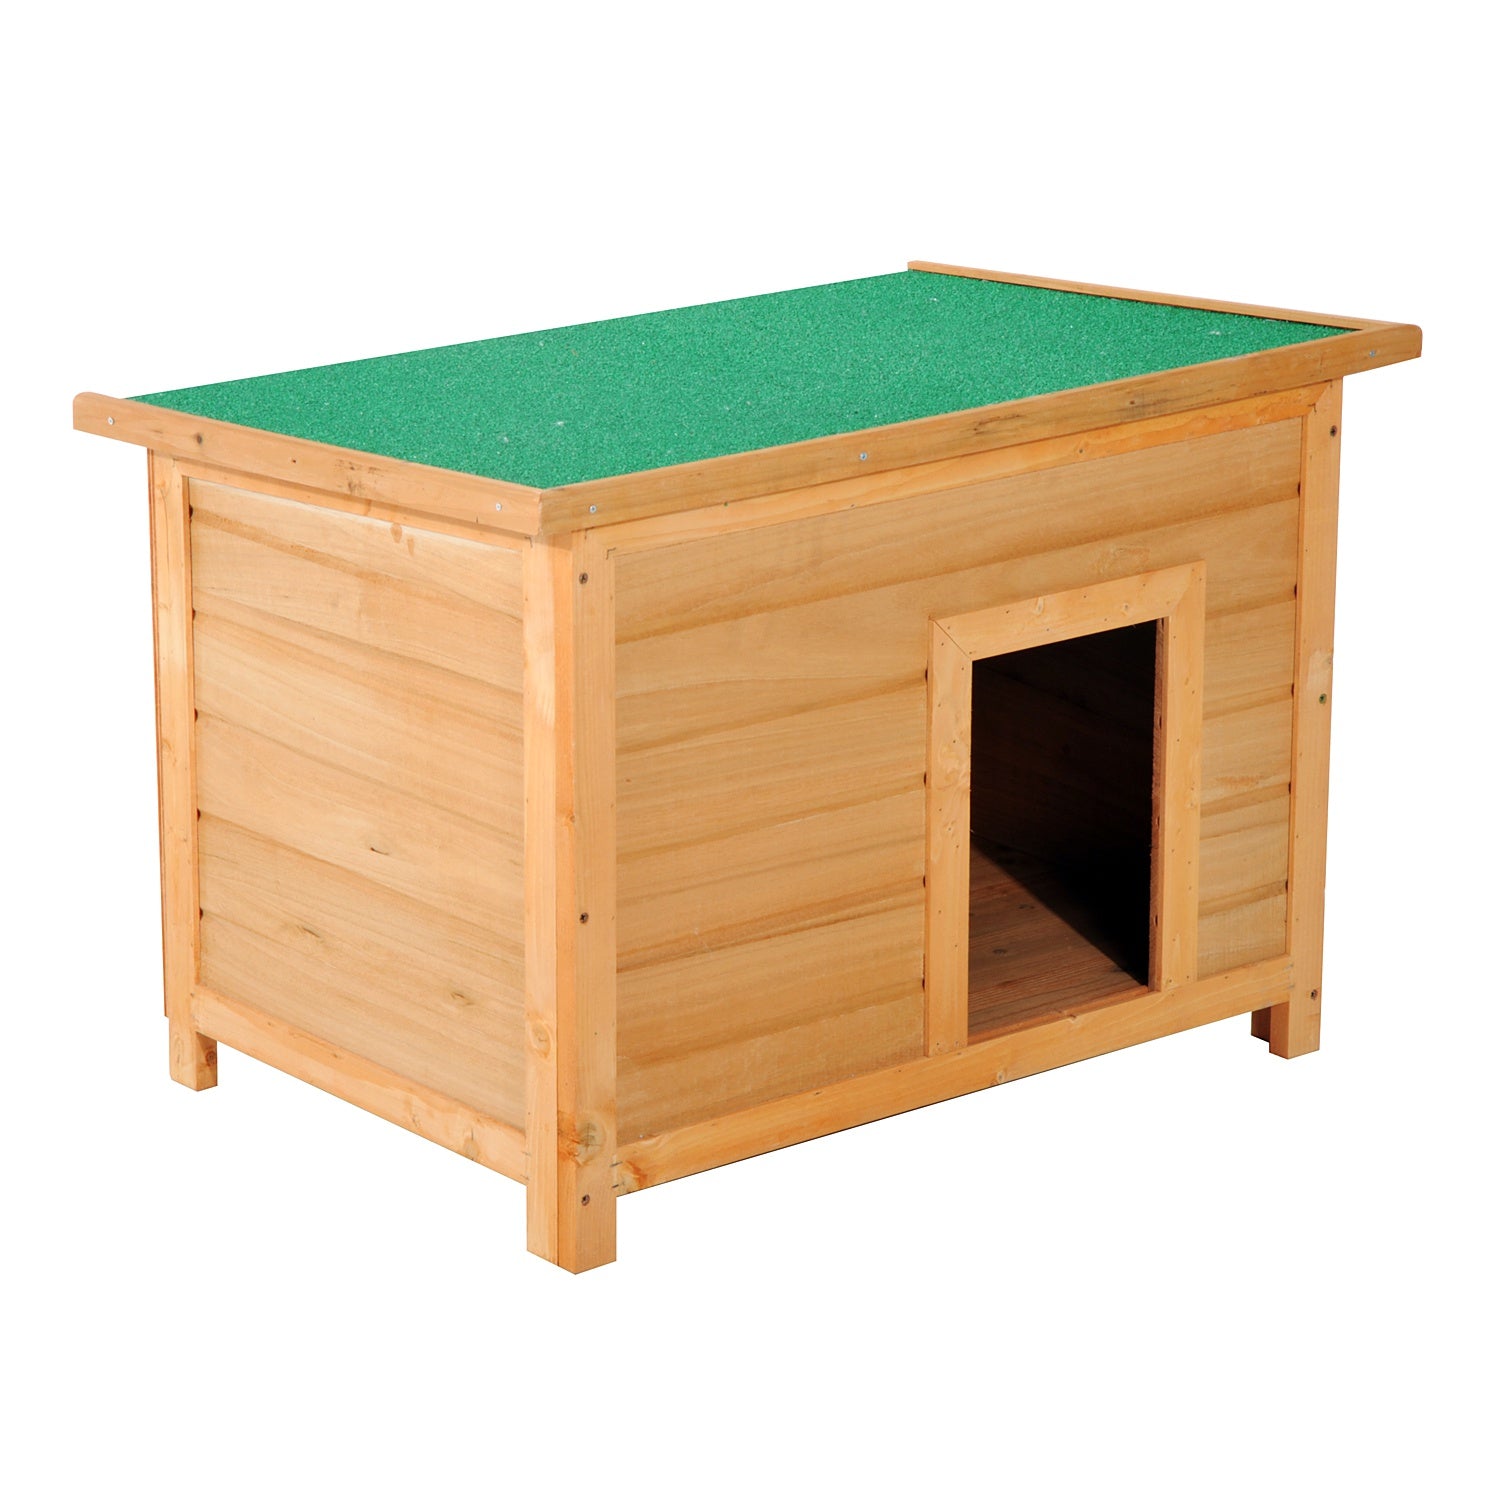 85Wx58Dx58H cm Waterproof Elevated Dog Kennel-Wooden